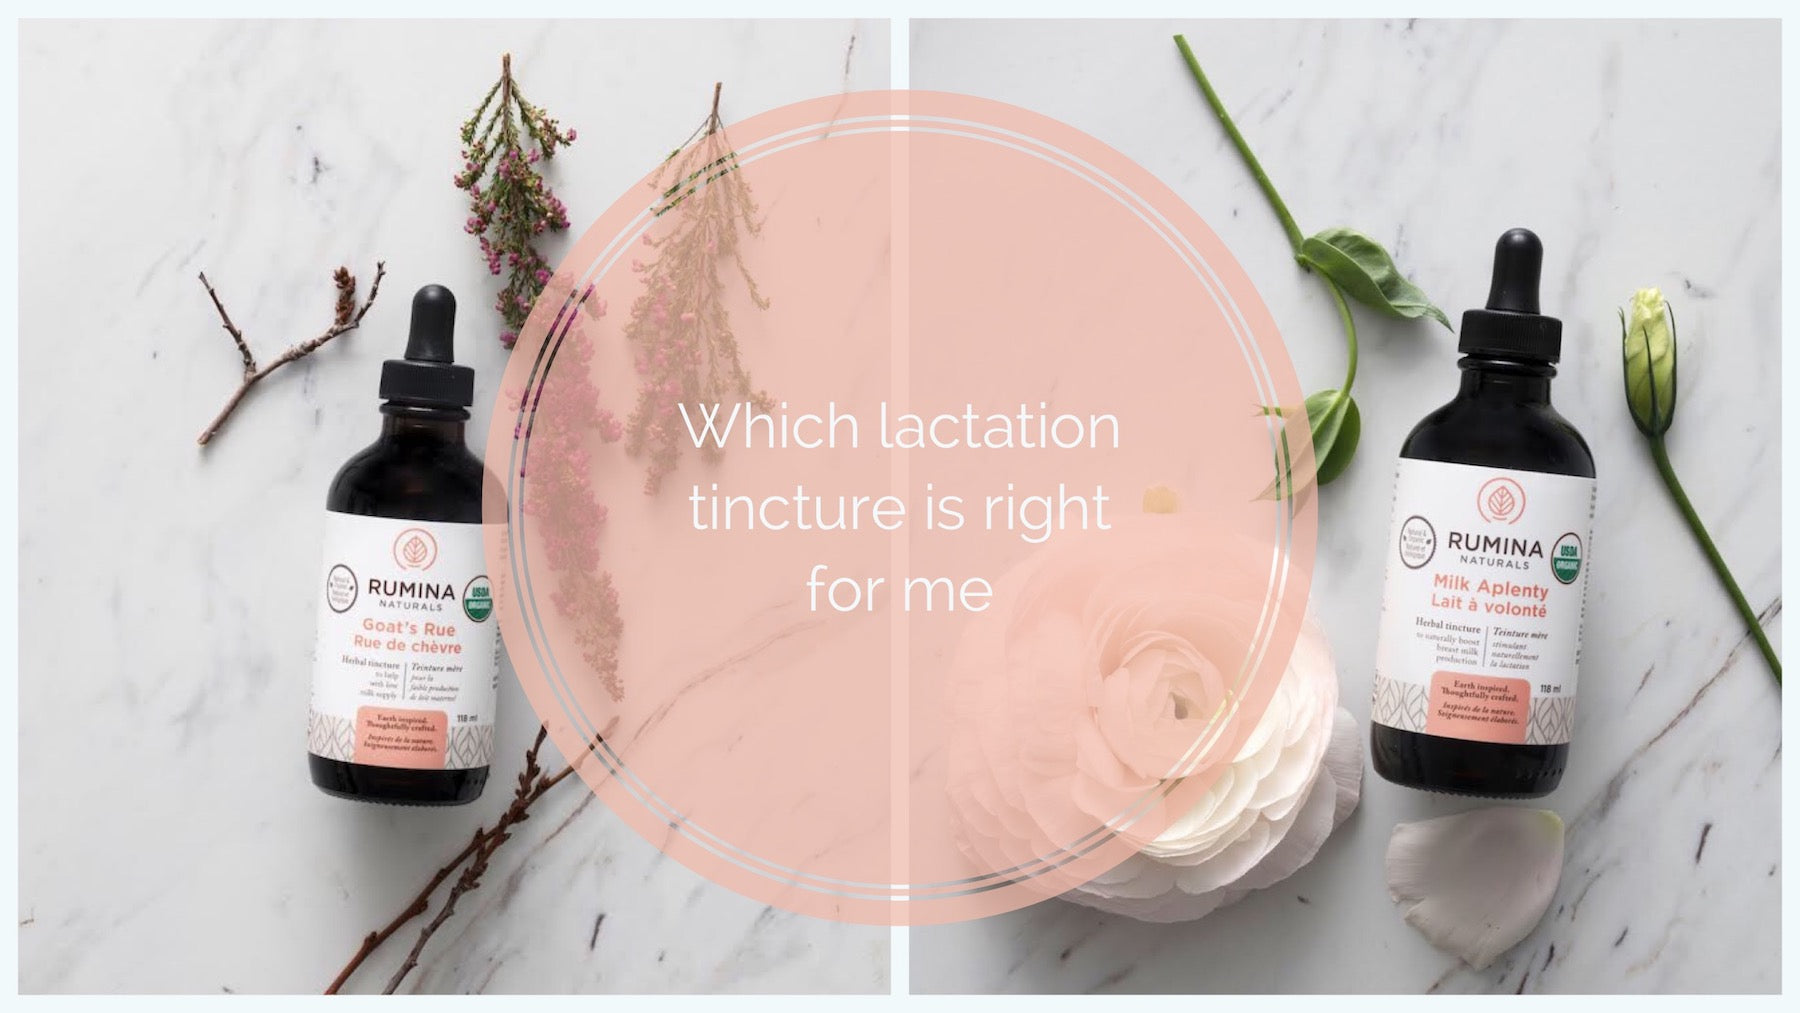 WHICH LACTATION TINCTURE IS RIGHT FOR ME?